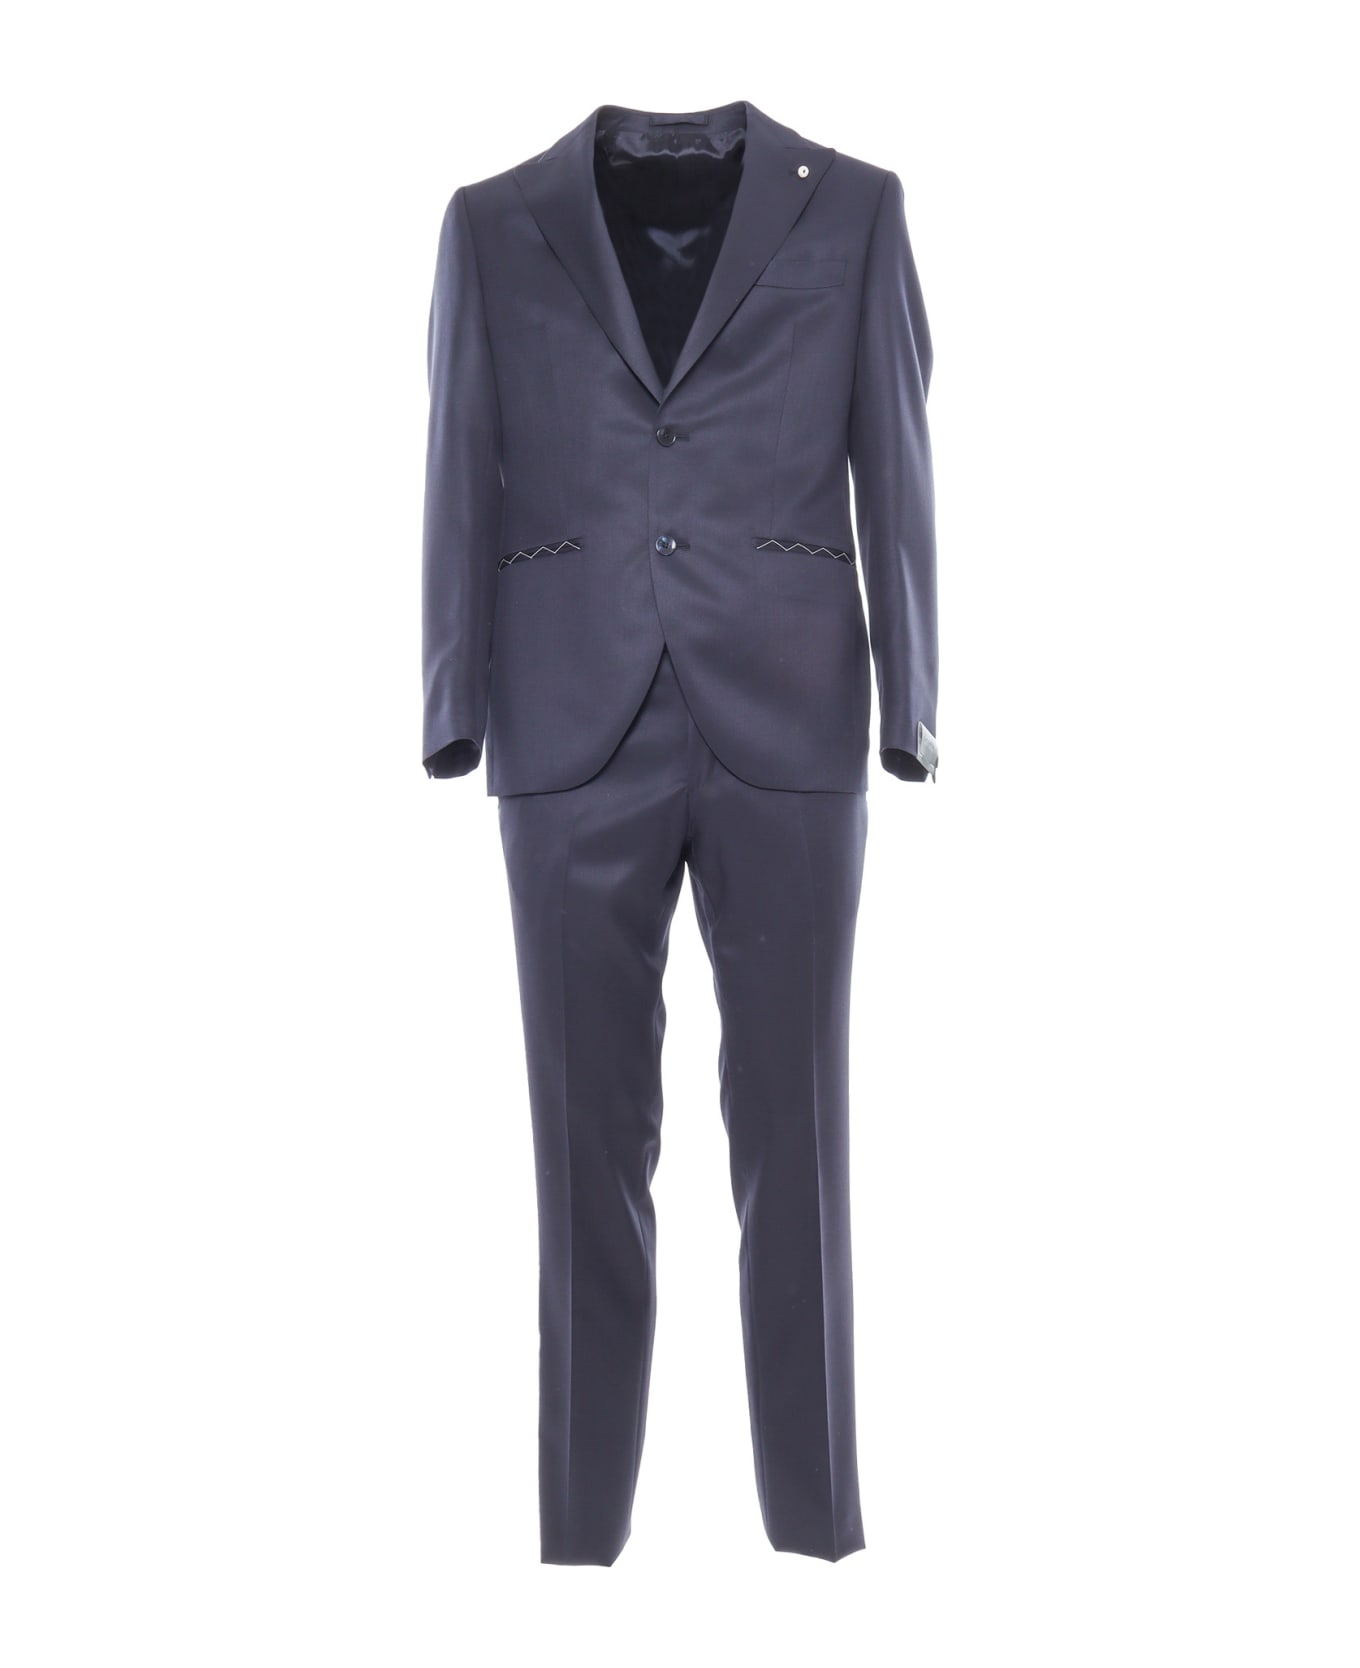 L.B.M. 1911 Single-breasted Suit - BLUE スーツ